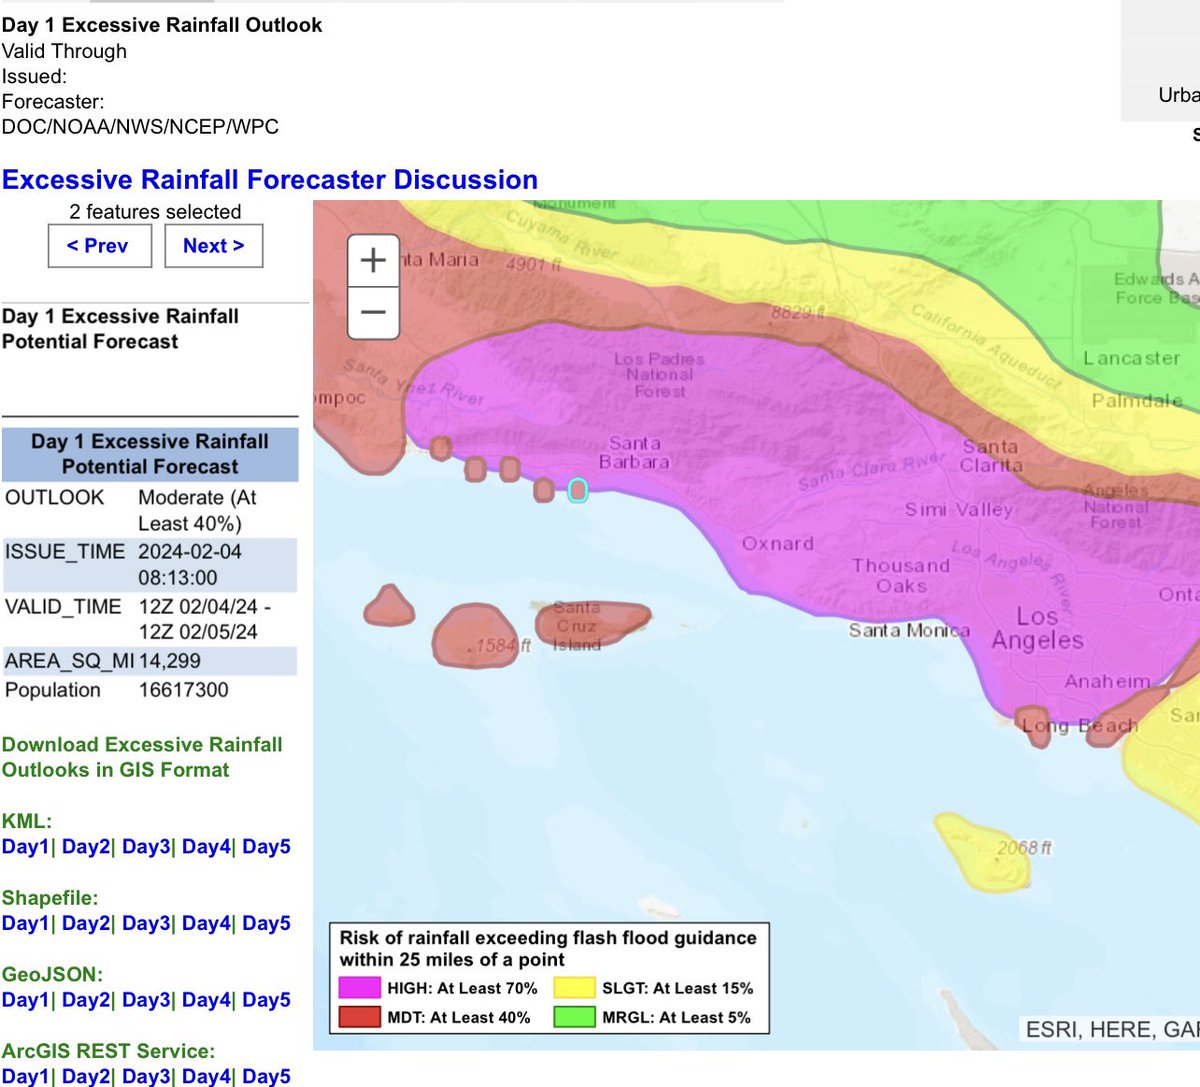 Sunday, February 4, 2024, 9:39 AM PST: Just in Santa Barbara, Ventura and LA counties are in the highest category for a flood. The purple code means it’s a severe flood of high confidence that’s going to unfold in the next 12 to 36-hour period. #FloodWarning #ElNino